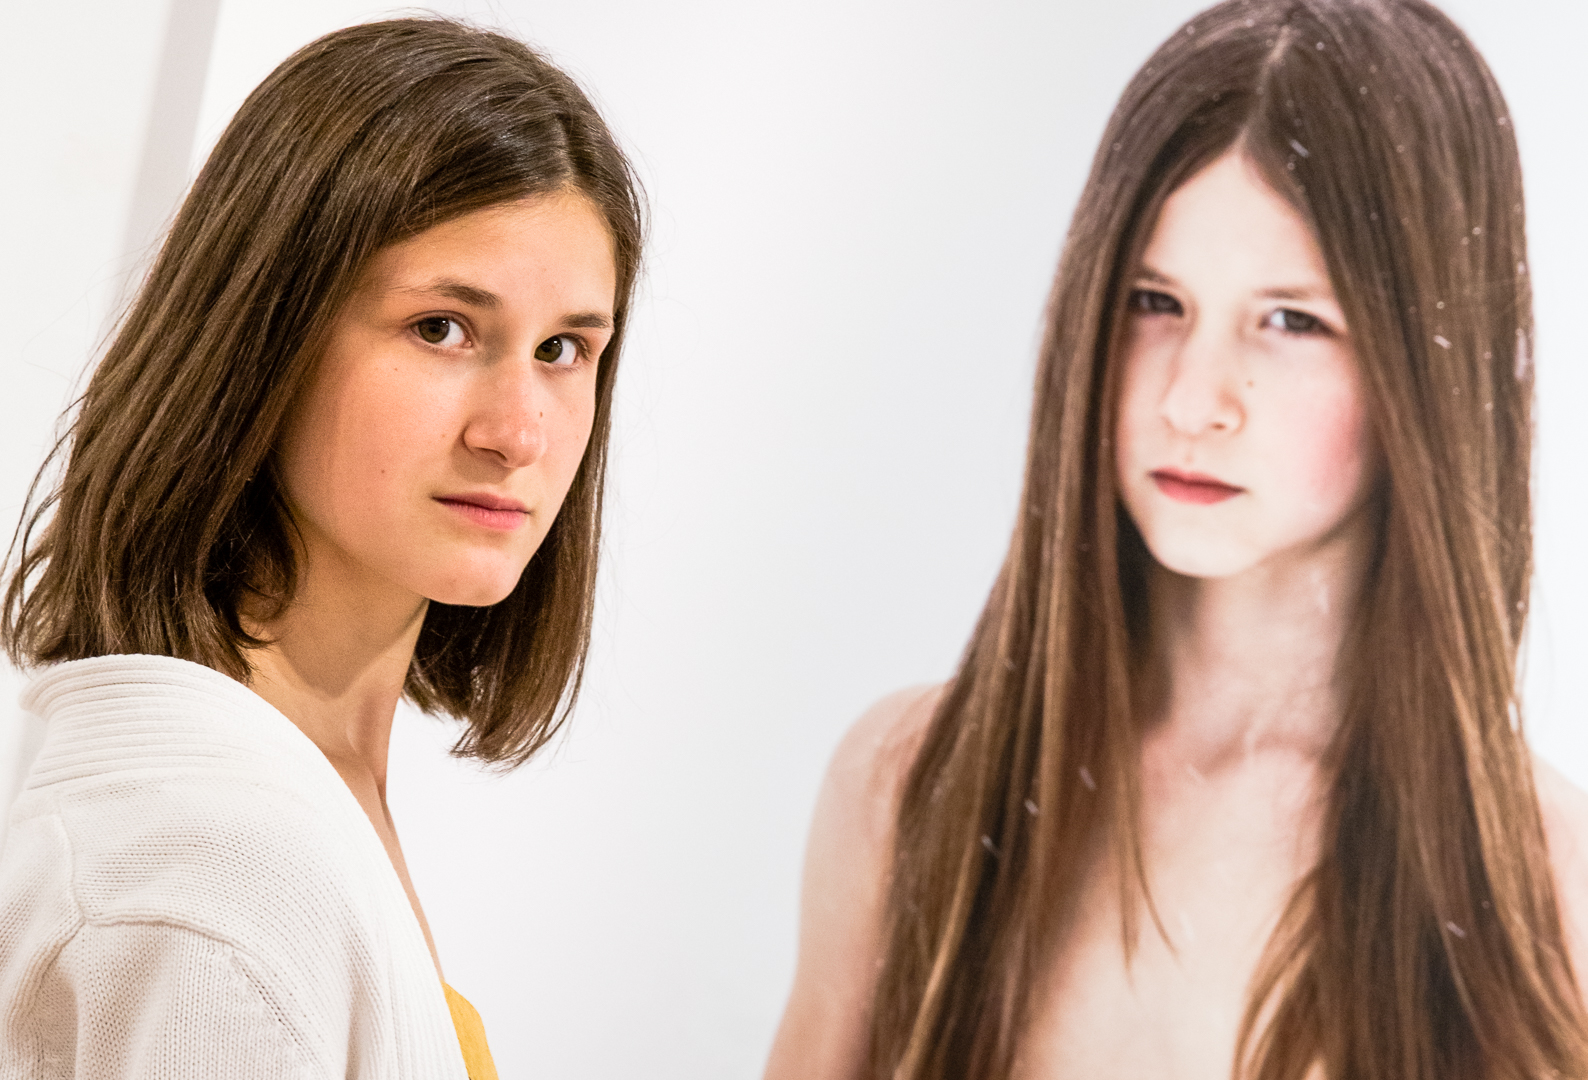 teenage photo model Emma Boudou takes the pose next to a large scale framed portrait of herself